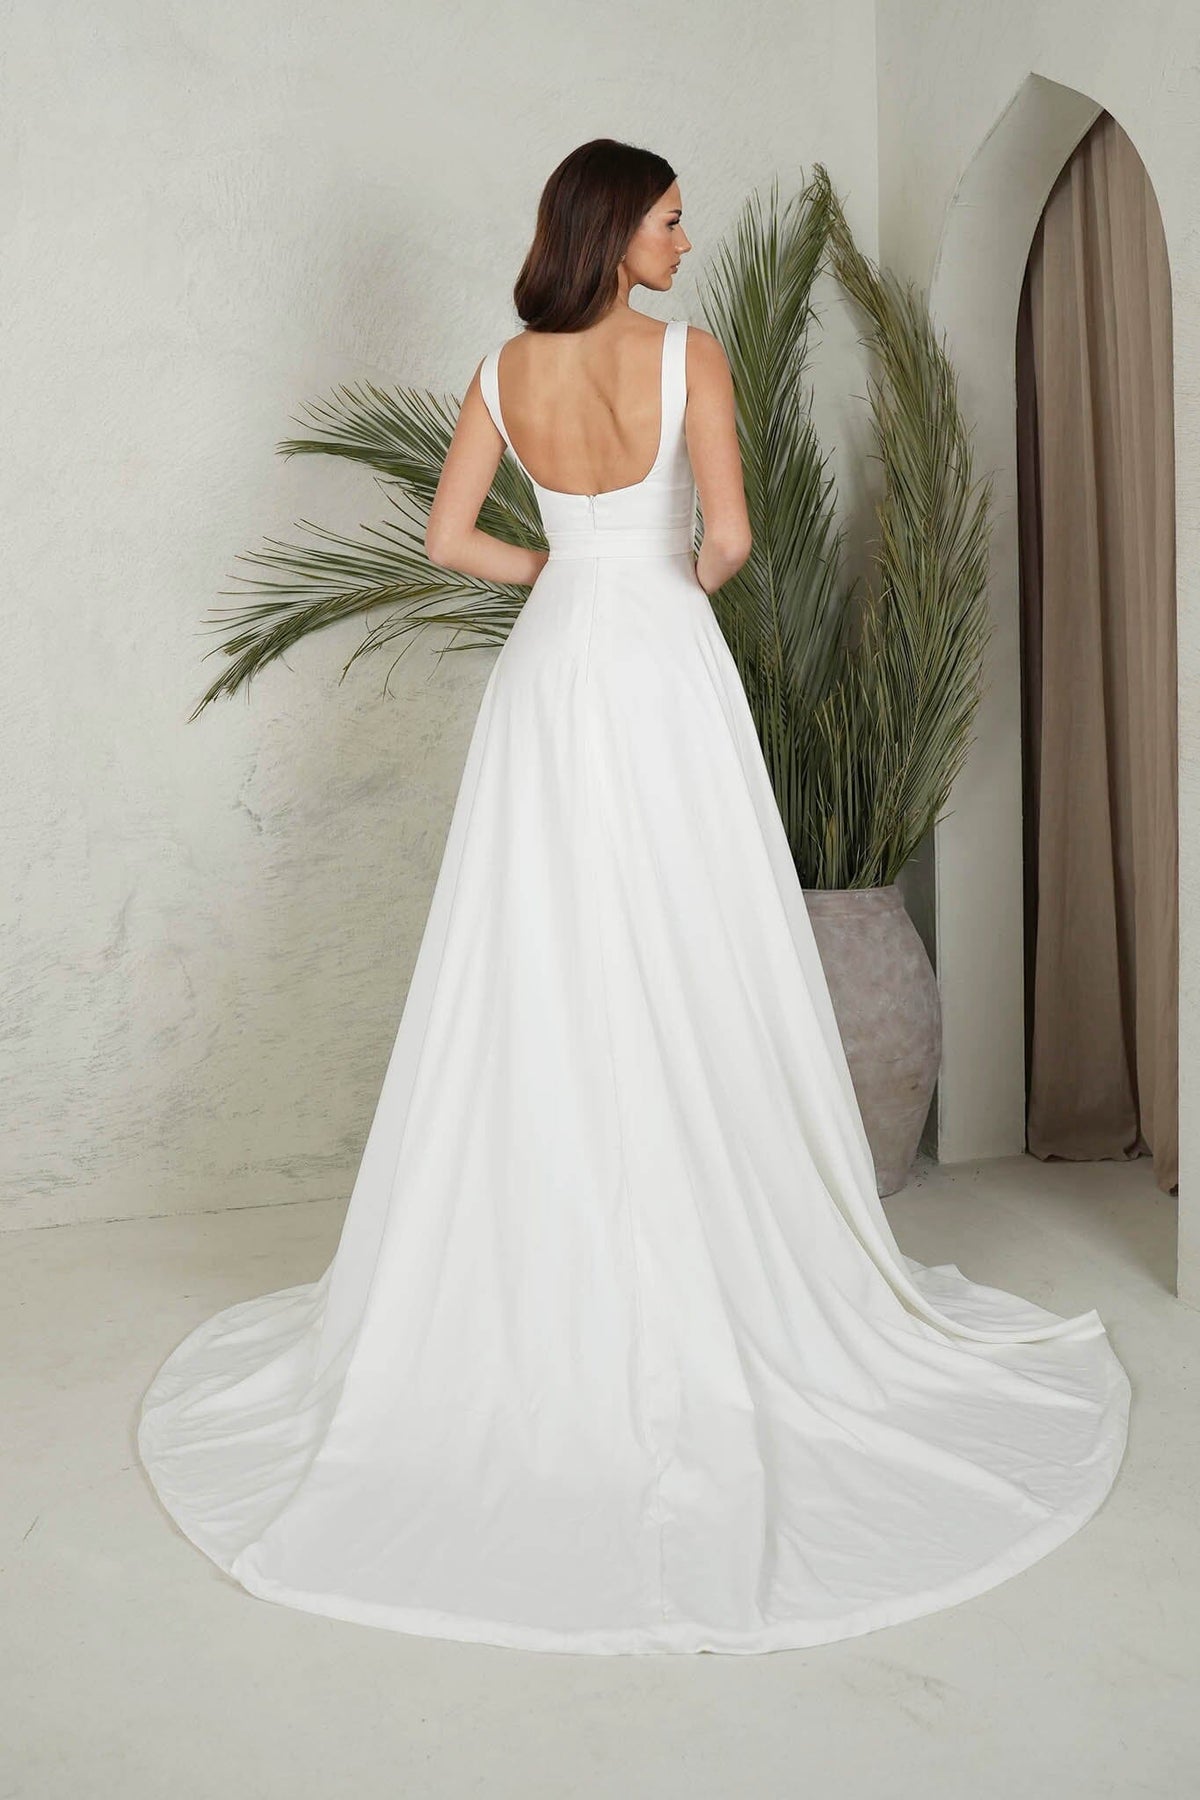 Open Square Back and Voluminous Skirt of Ivory White A-line Ball Gown with Square Neckline, Shoulder Straps and Detachable Belt